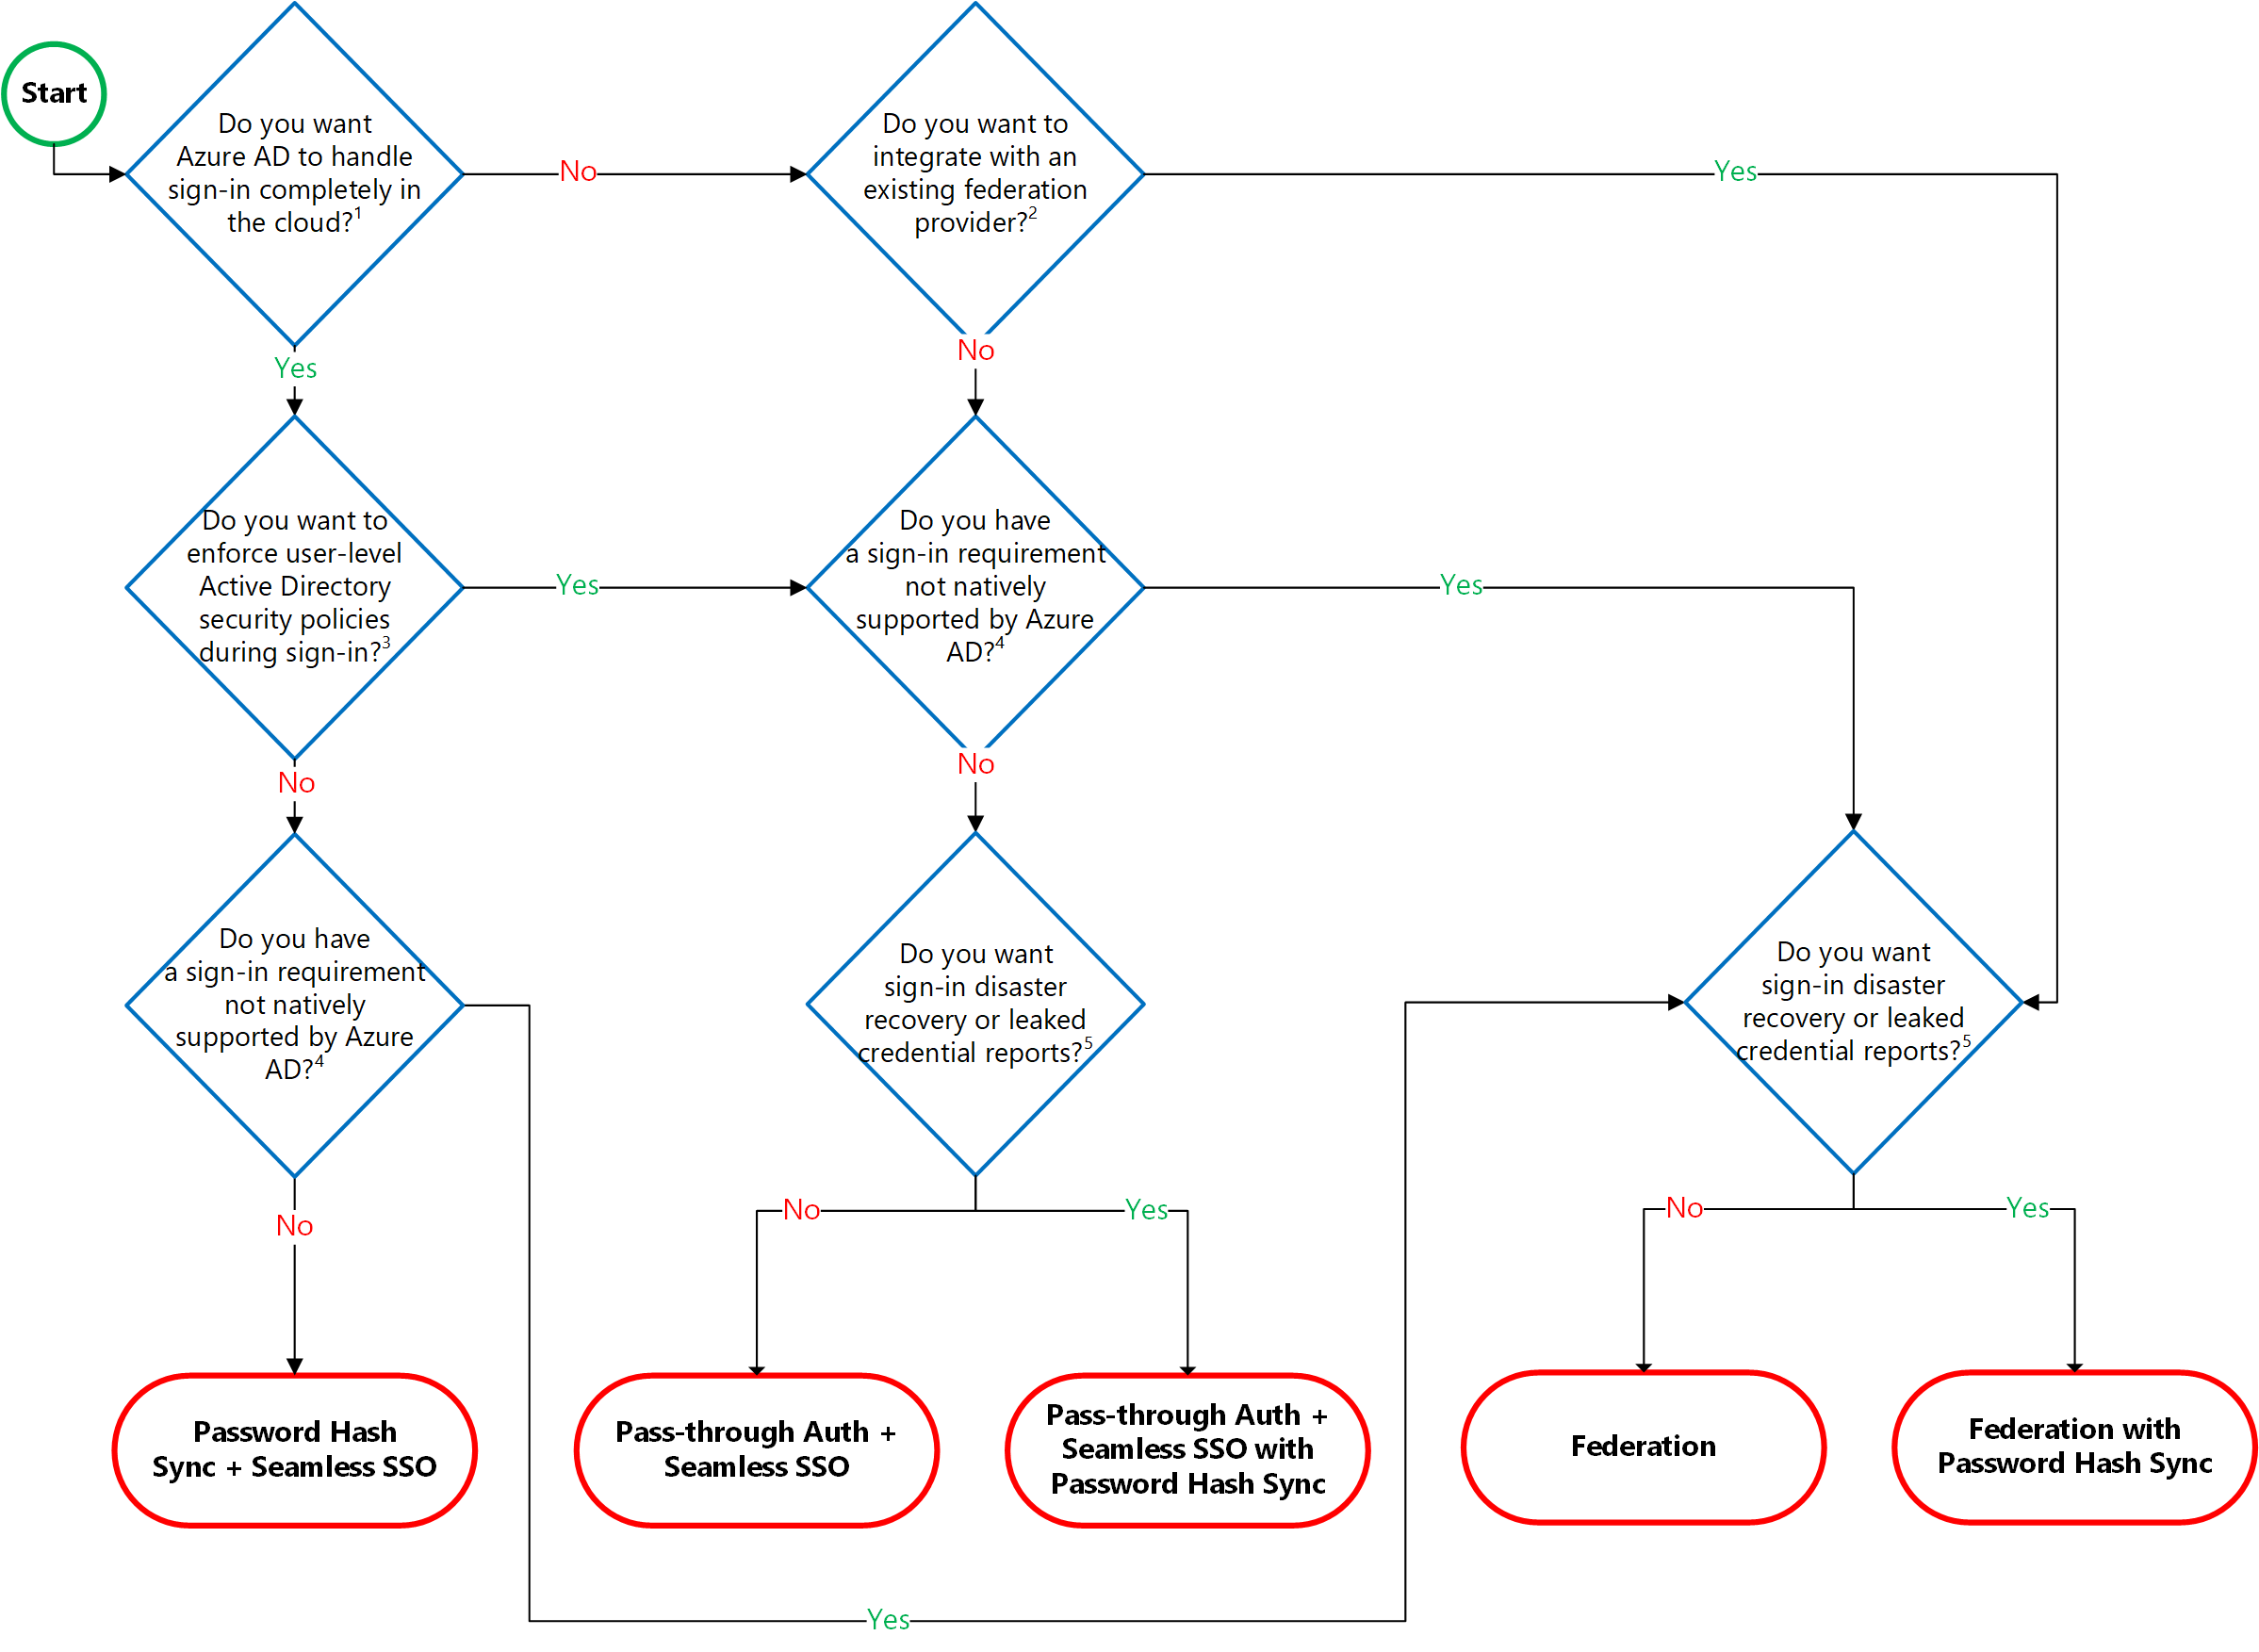 diagram displays a decision tree flowchart to help organizations determine which authentication method is right for them